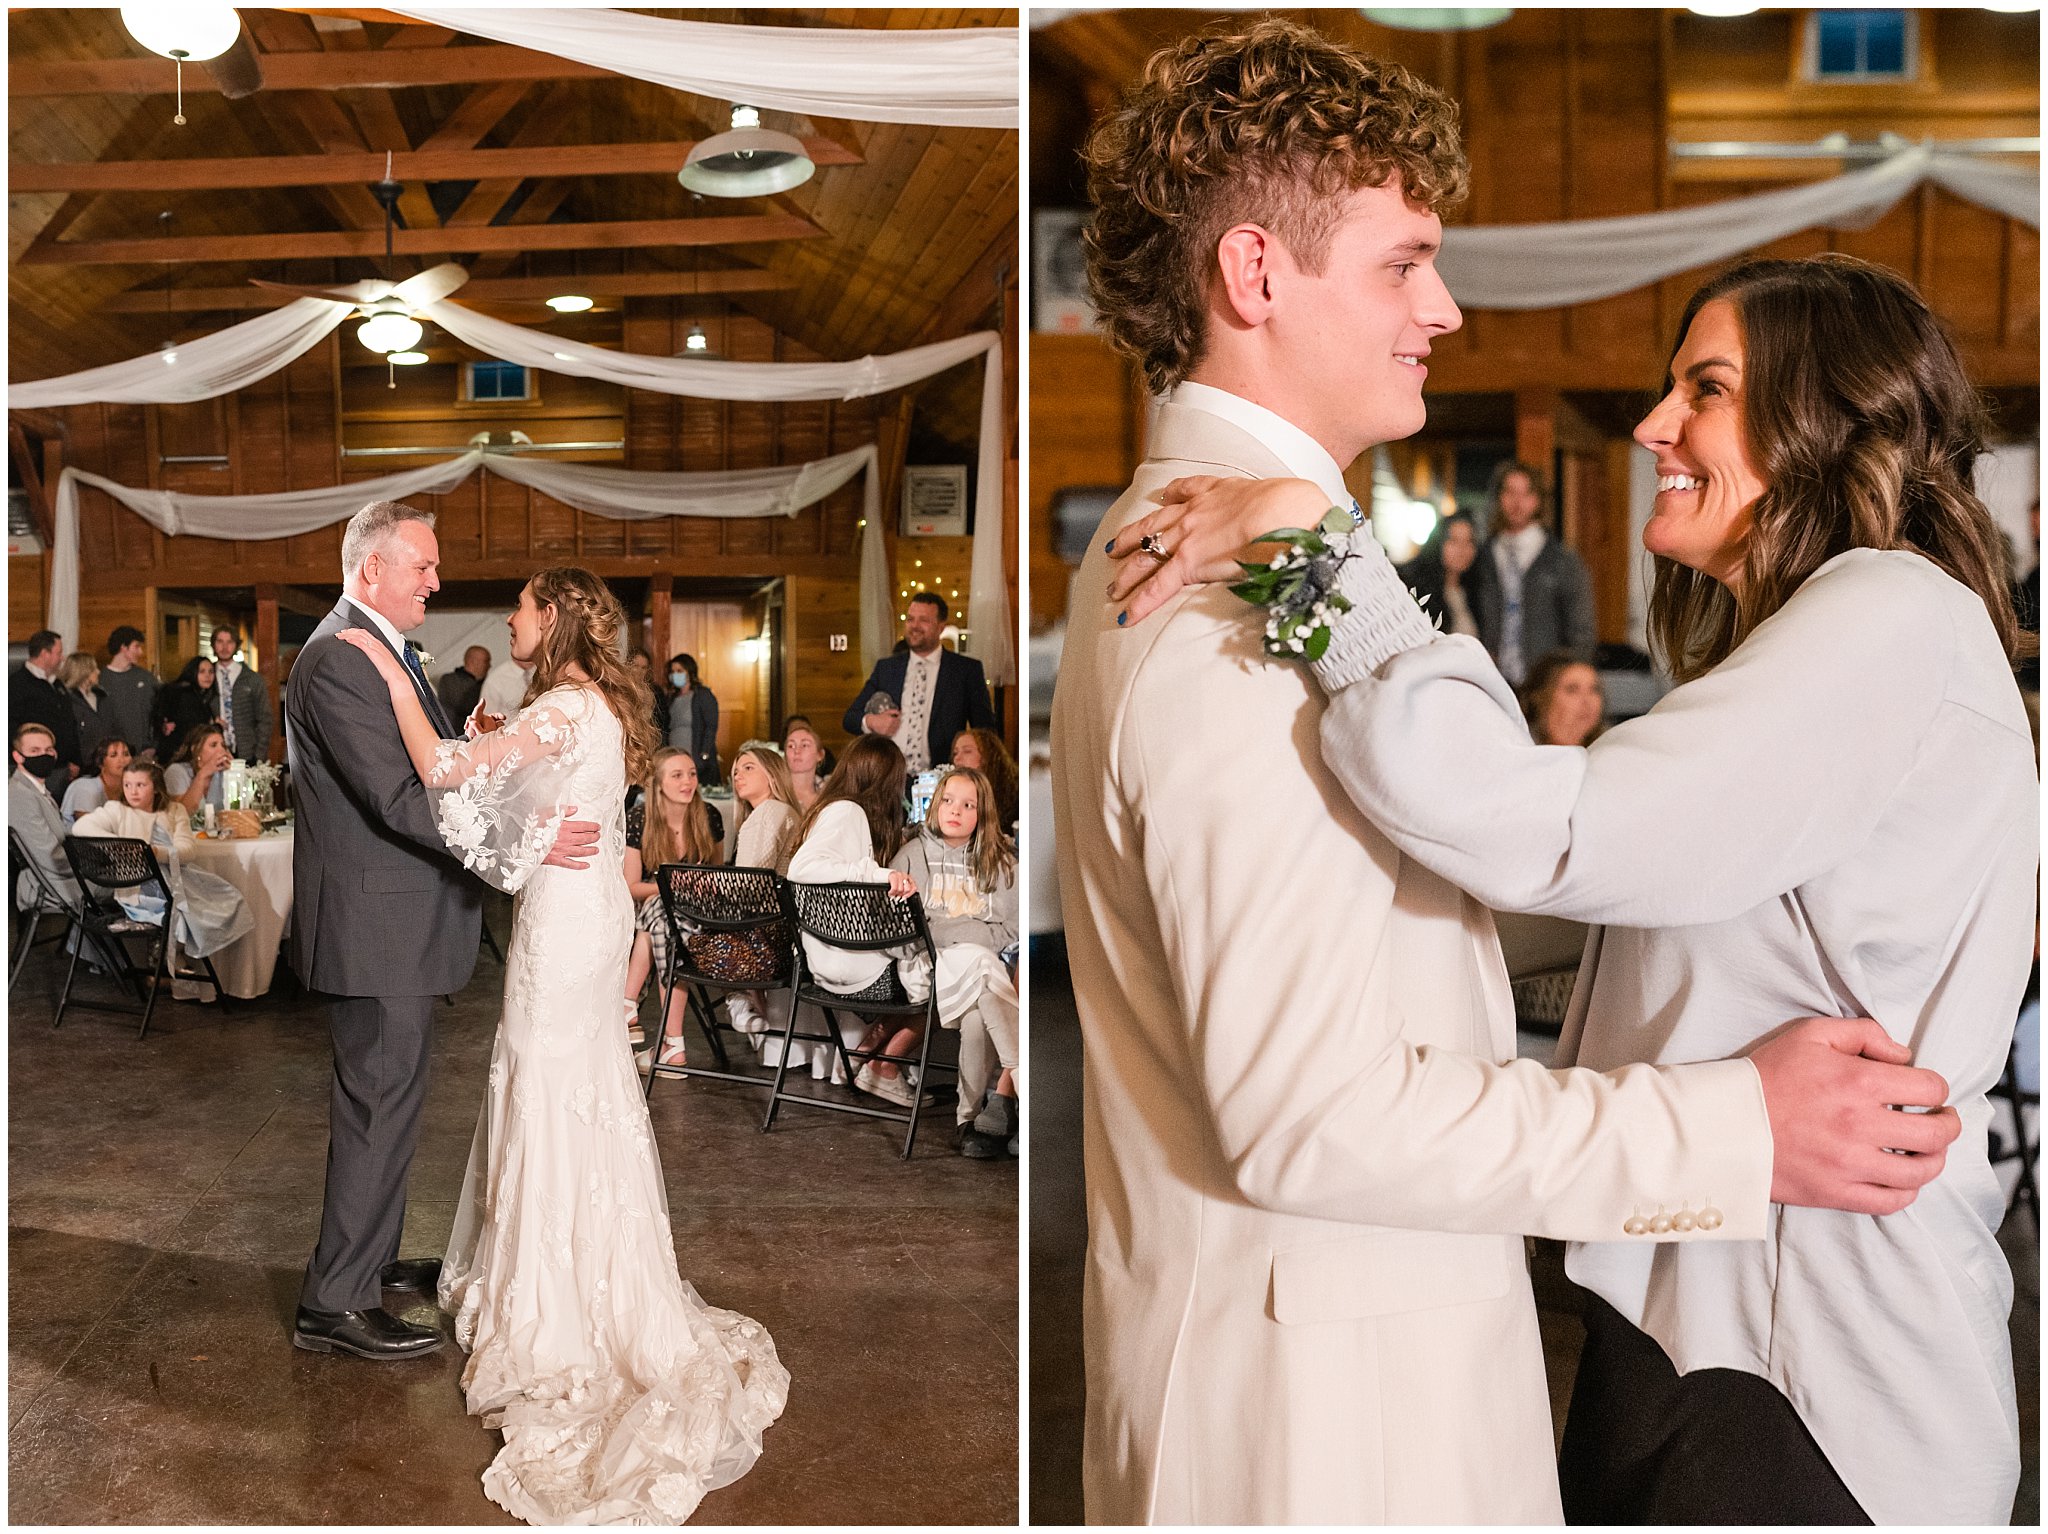 Father Daughter and Mother Son dances at reception | Oquirrh Mountain Temple and Draper Day Barn Winter Wedding | Jessie and Dallin Photography